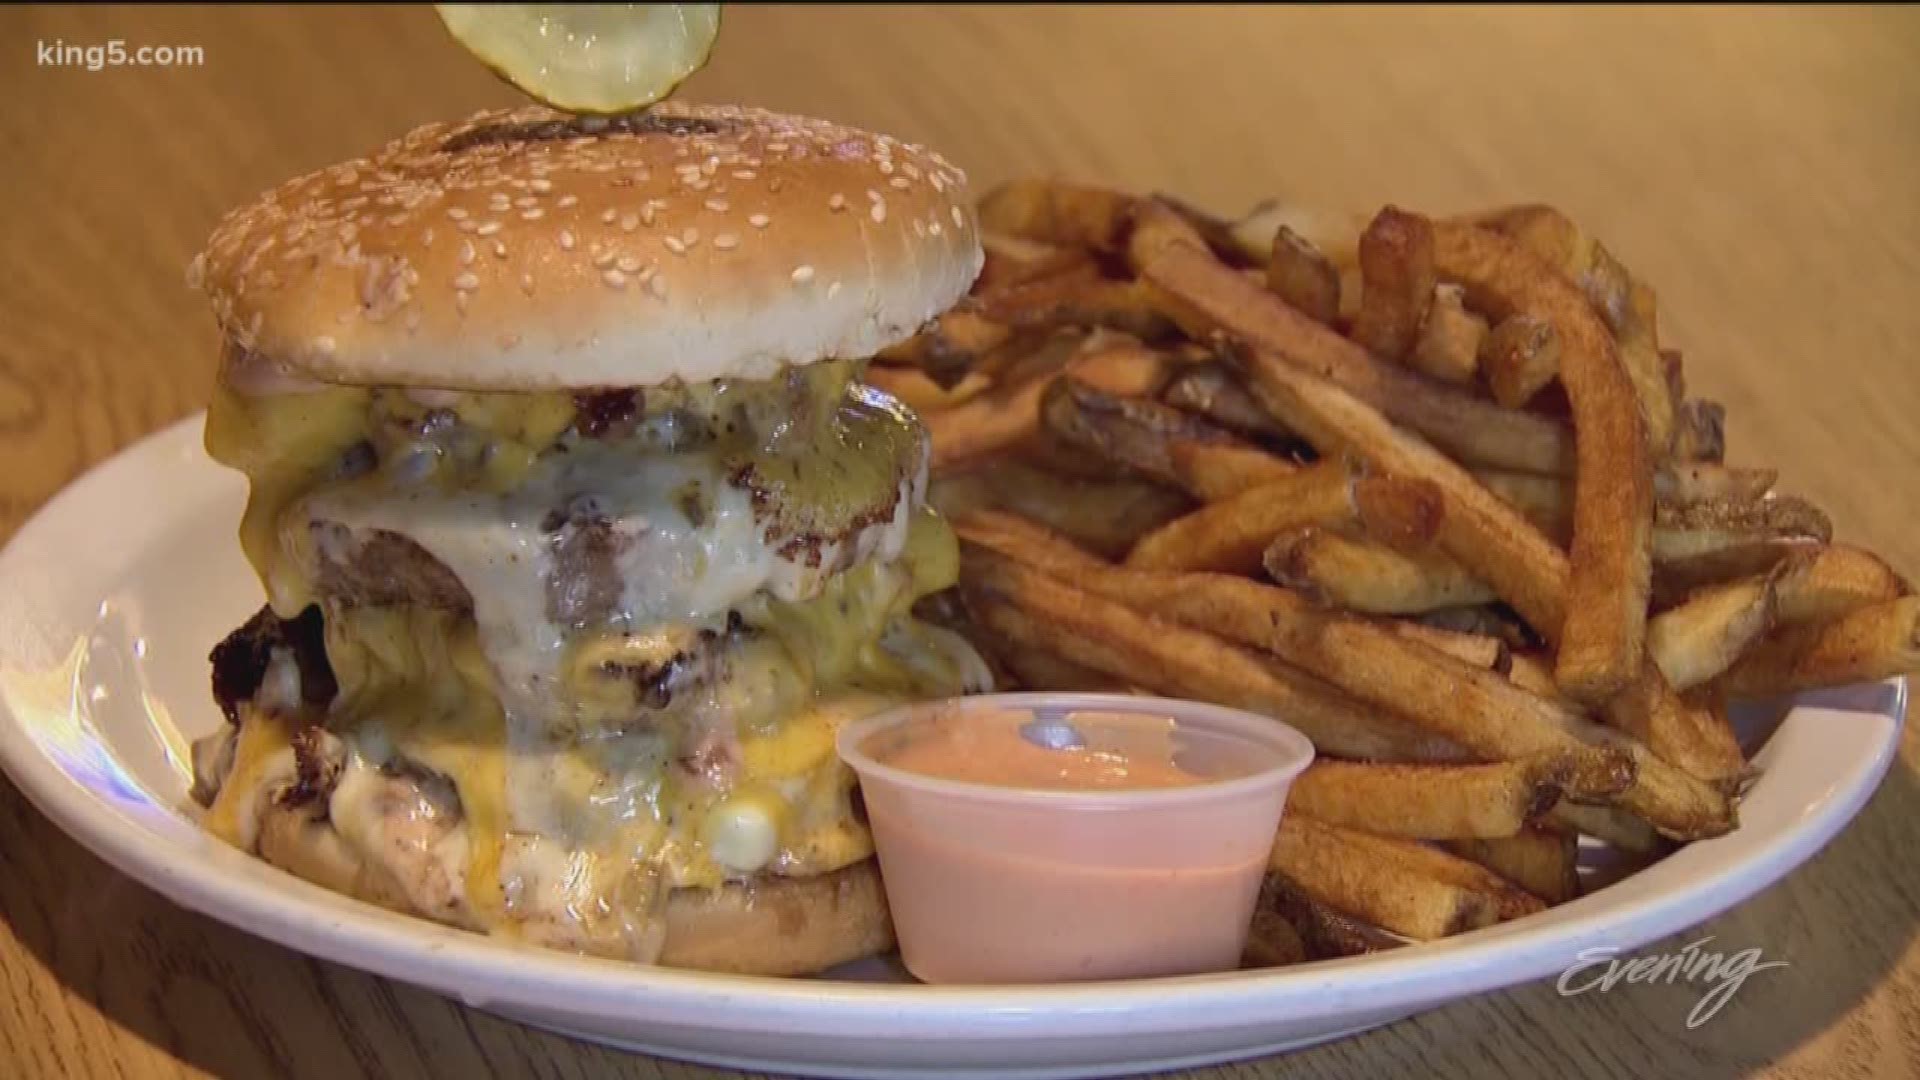 5-Star Dive Bar Pla-Mor Bar and Grill has some of the best burgers in the northwest. #k5evening